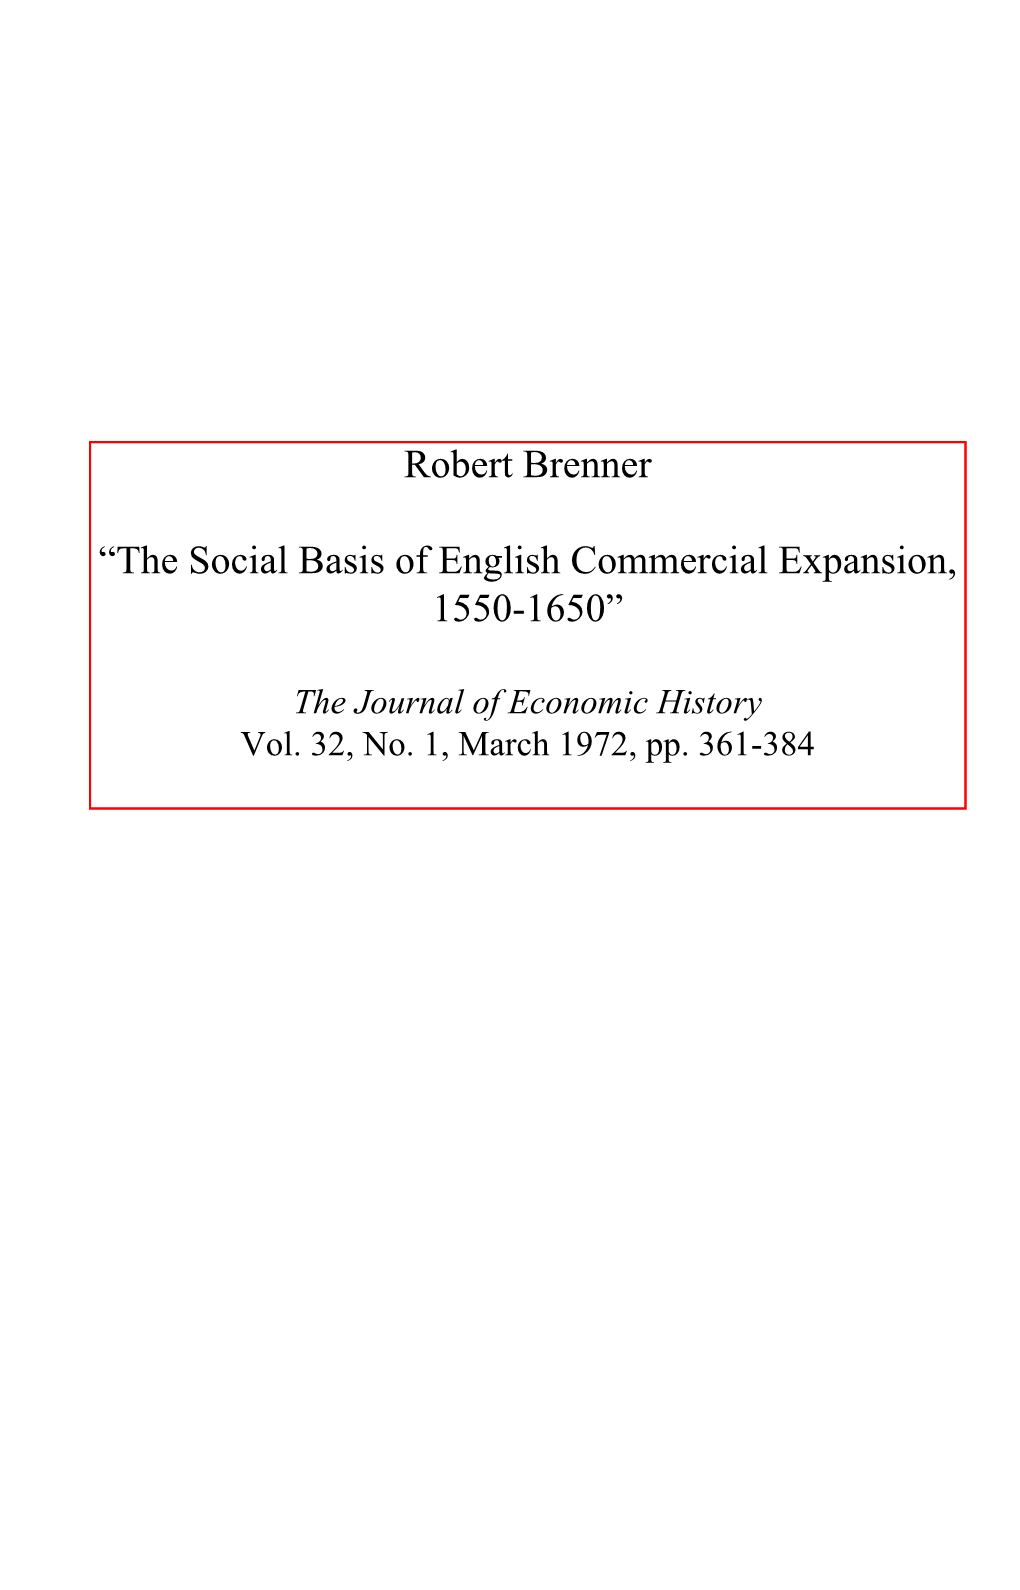 The Social Basis of English Commercial Expansion